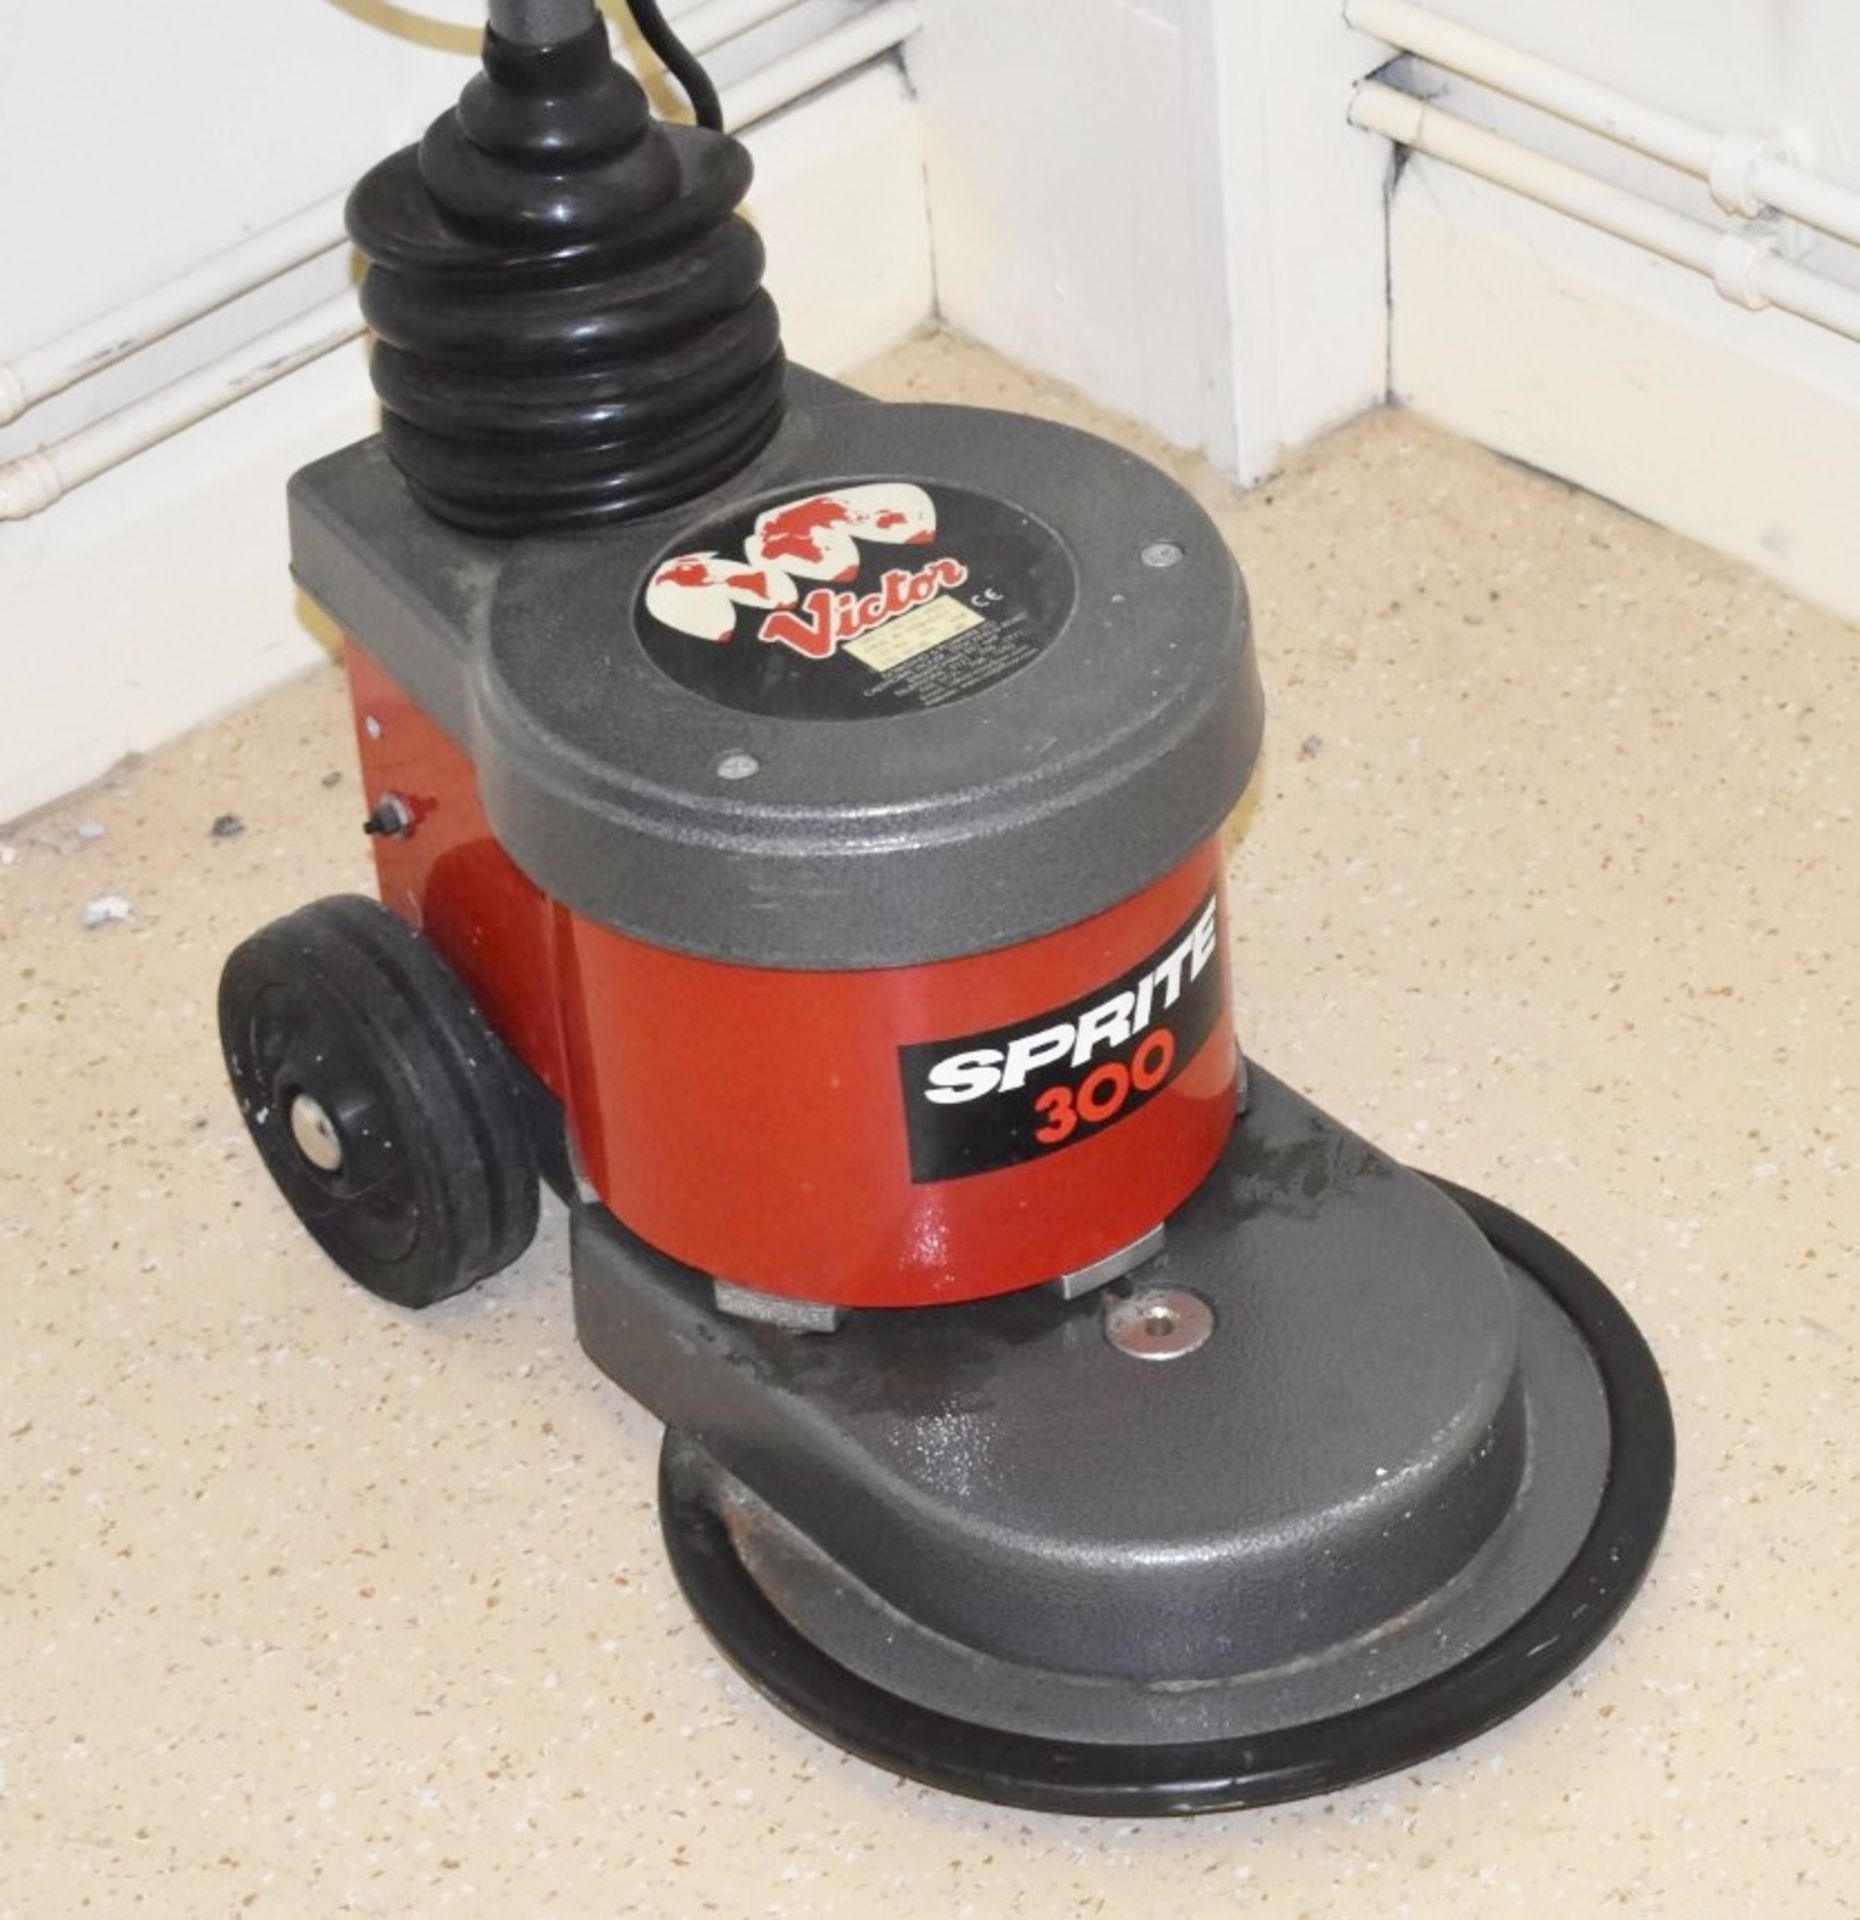 1 x Victor Sprite 300 Rotary Floor Polisher - RRP £700 - Training Room Use Only - Ref VM225 B2 -